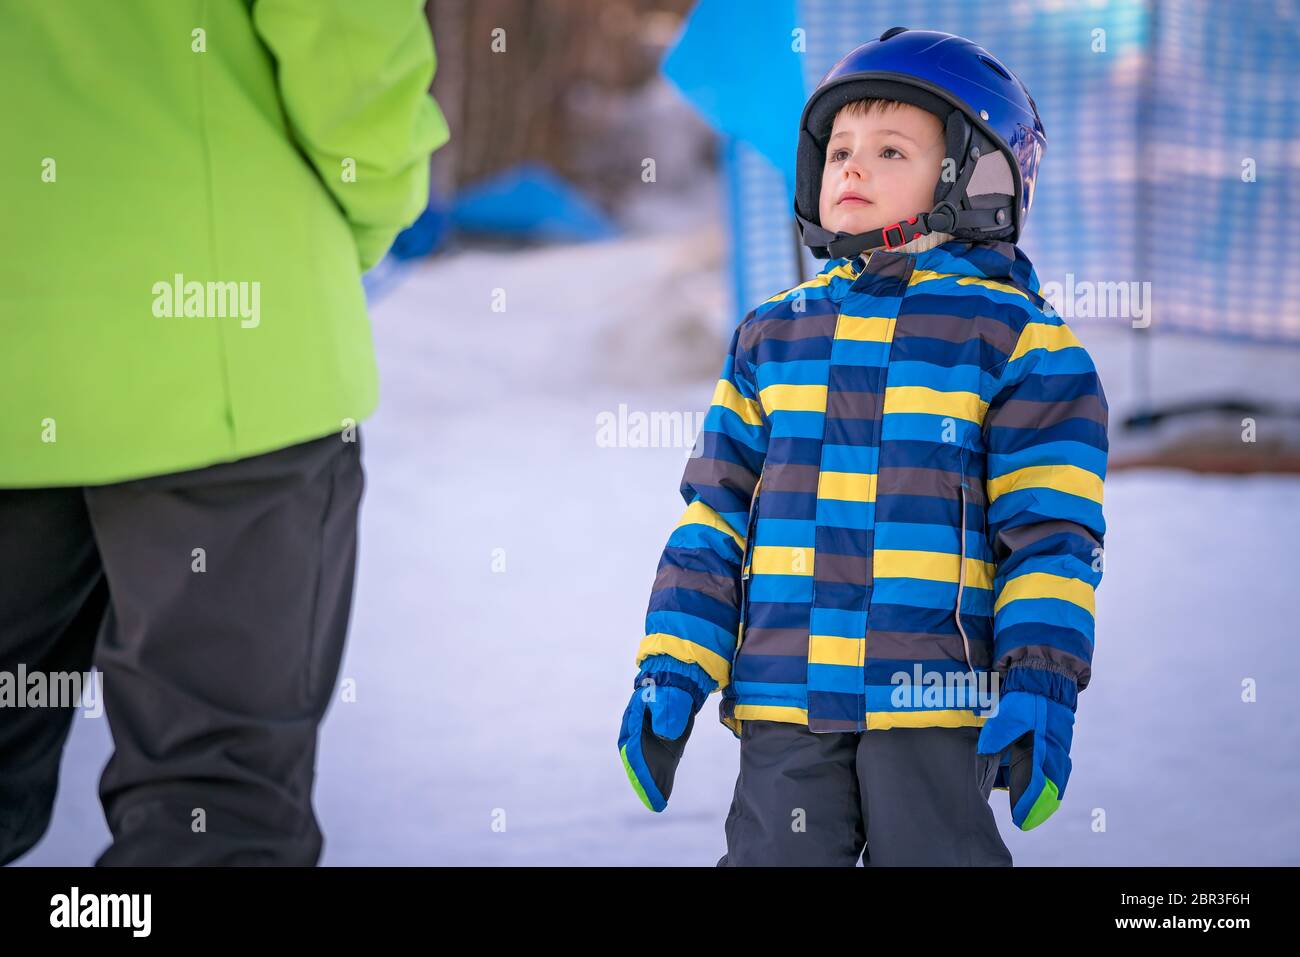 Cute little Caucasian ski adept looking at and listening to his ski instructor on a slope in winter Stock Photo